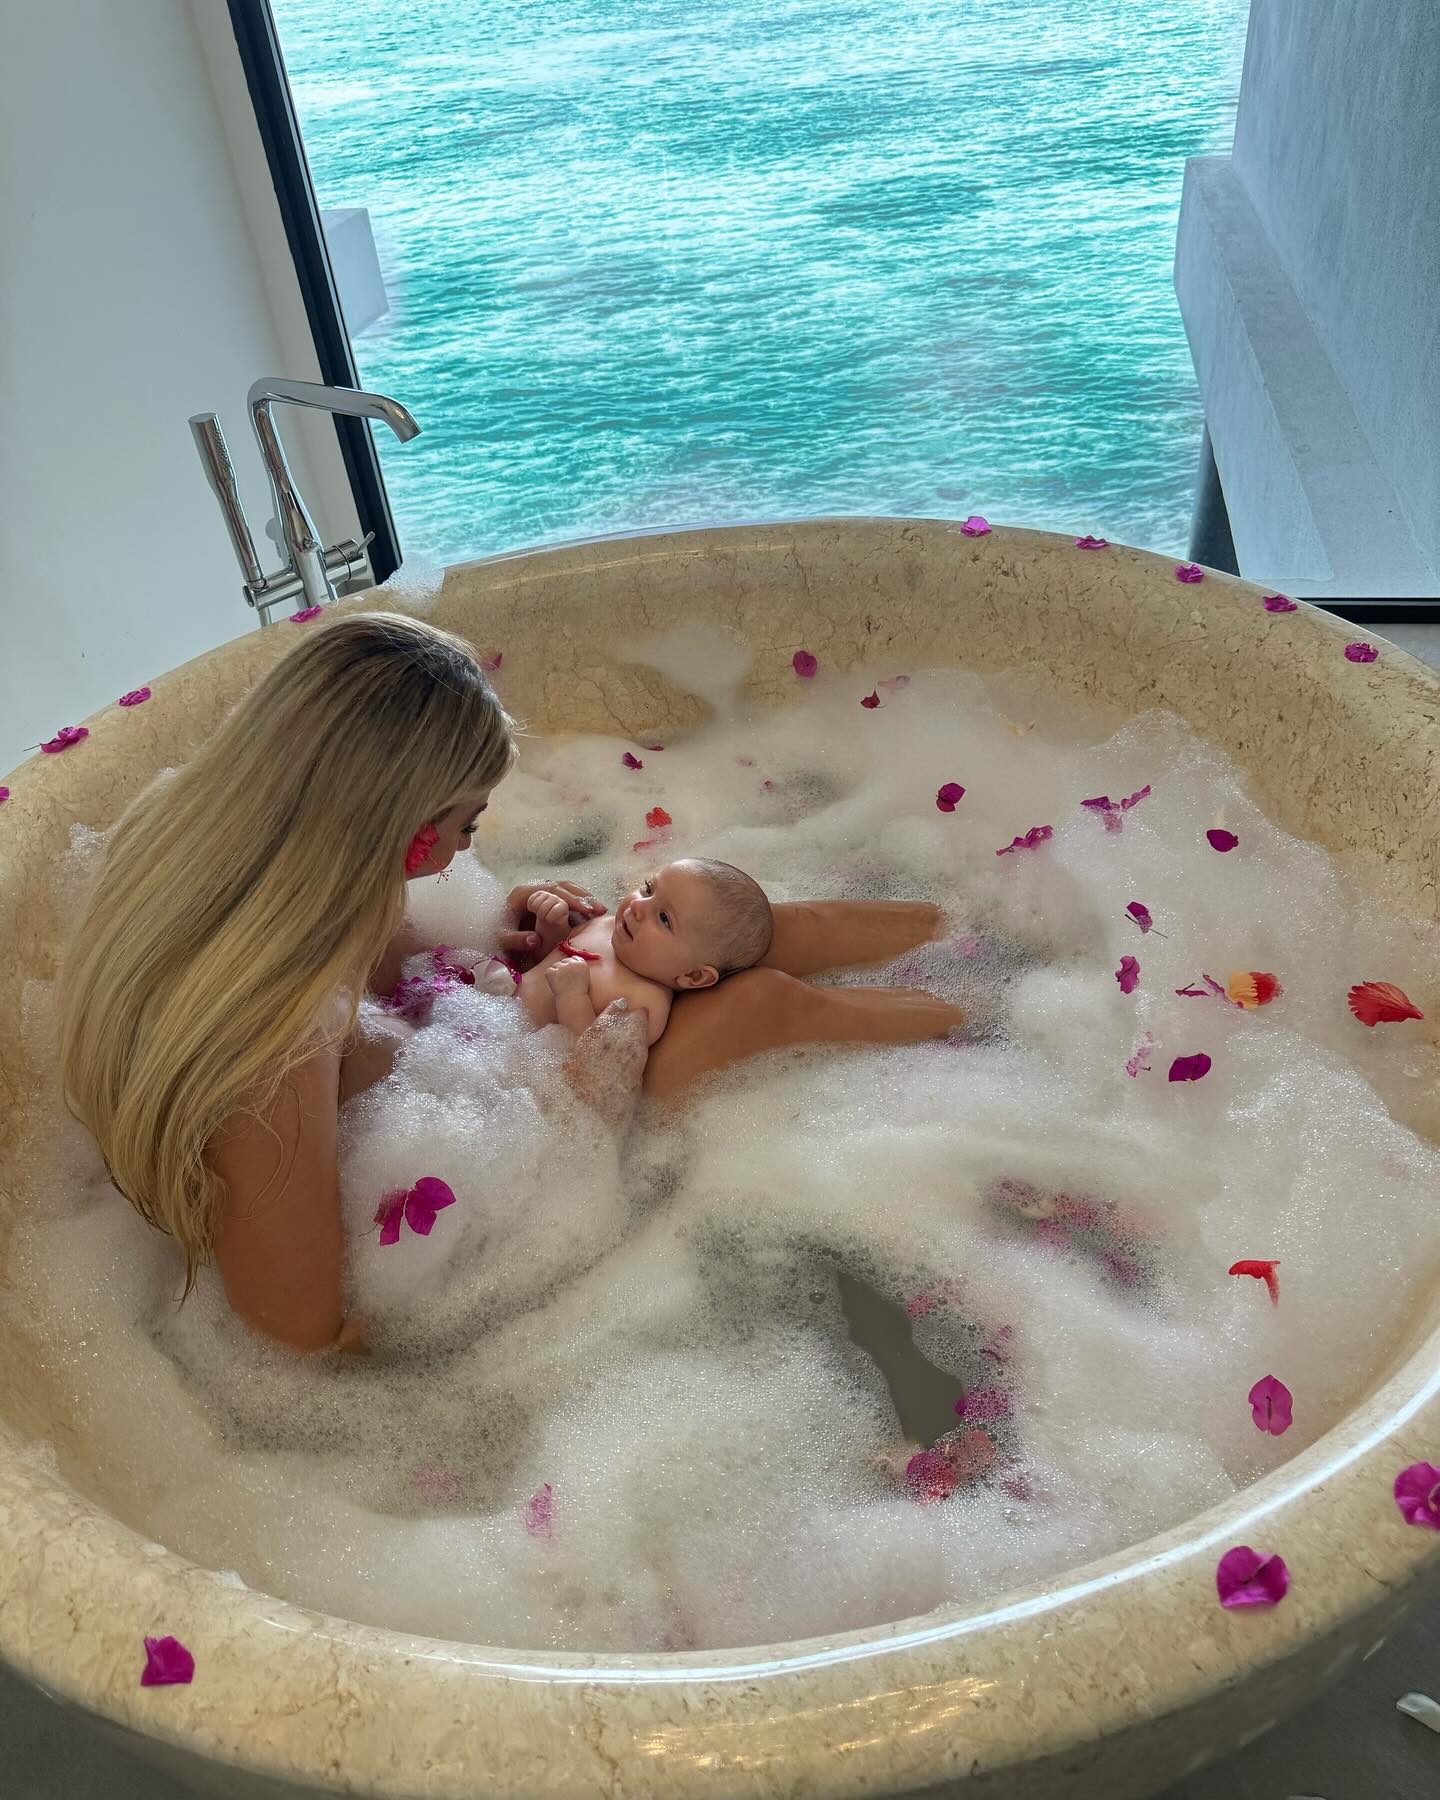 bathtub with a view, with you  @oce4nrose 🛁 🫧 🌺 

this is my dream come true, #chapter31